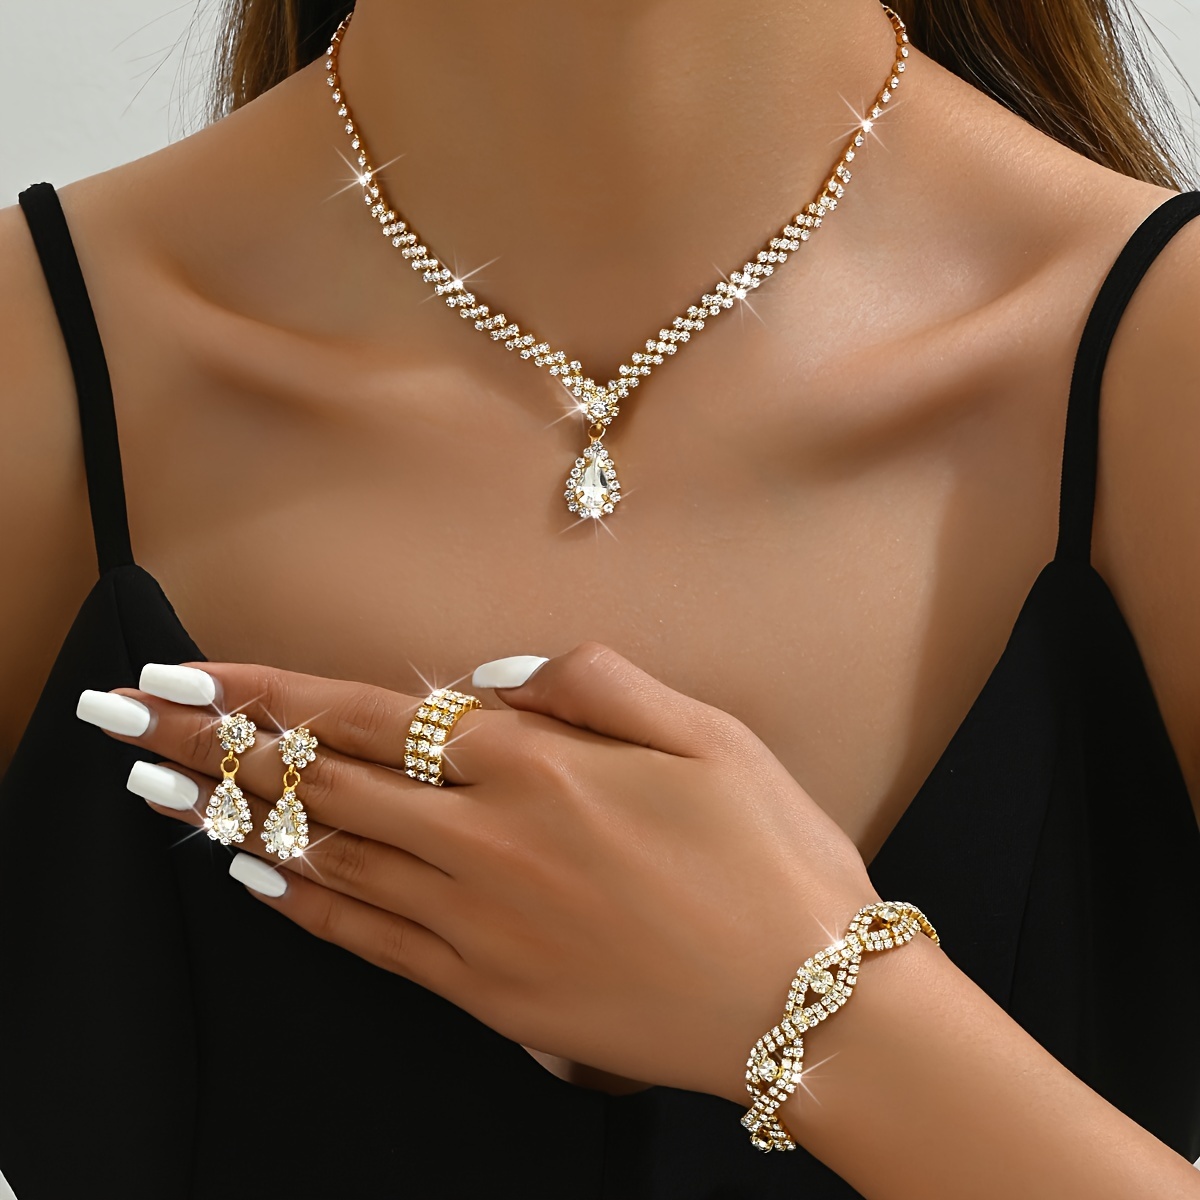 

Elegant 4-piece Jewelry Set Toward Women - Silvery & Golden Plated With Sparkling Rhinestones, Includes Necklace, Earrings, Bracelet, Ring - Perfect Toward Parties & Gifts